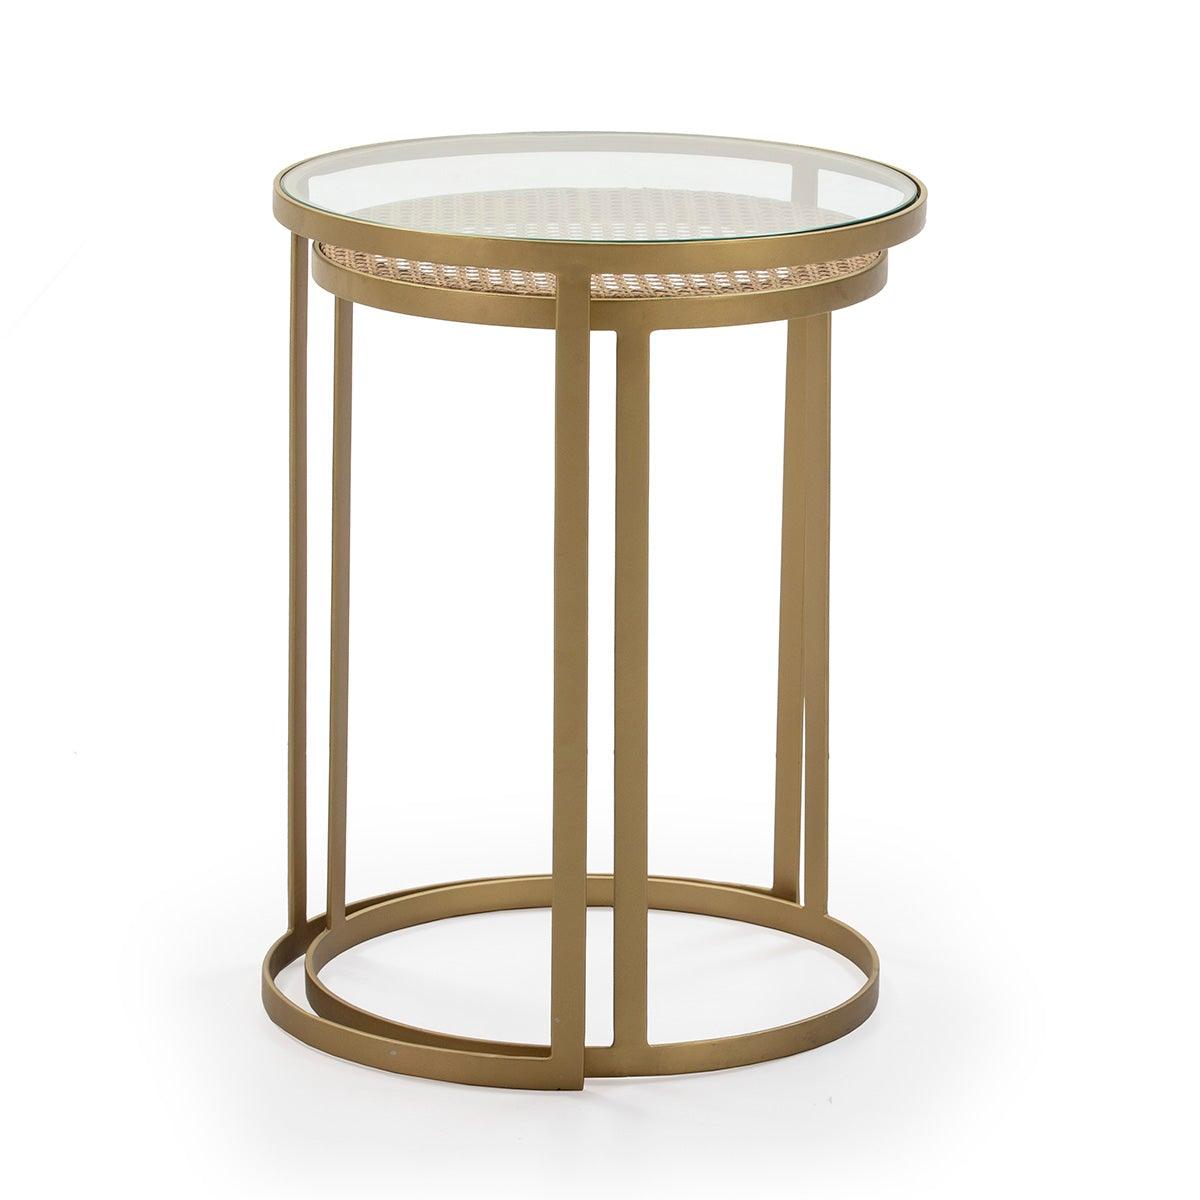 Gold Metal Side Table Set (x2)